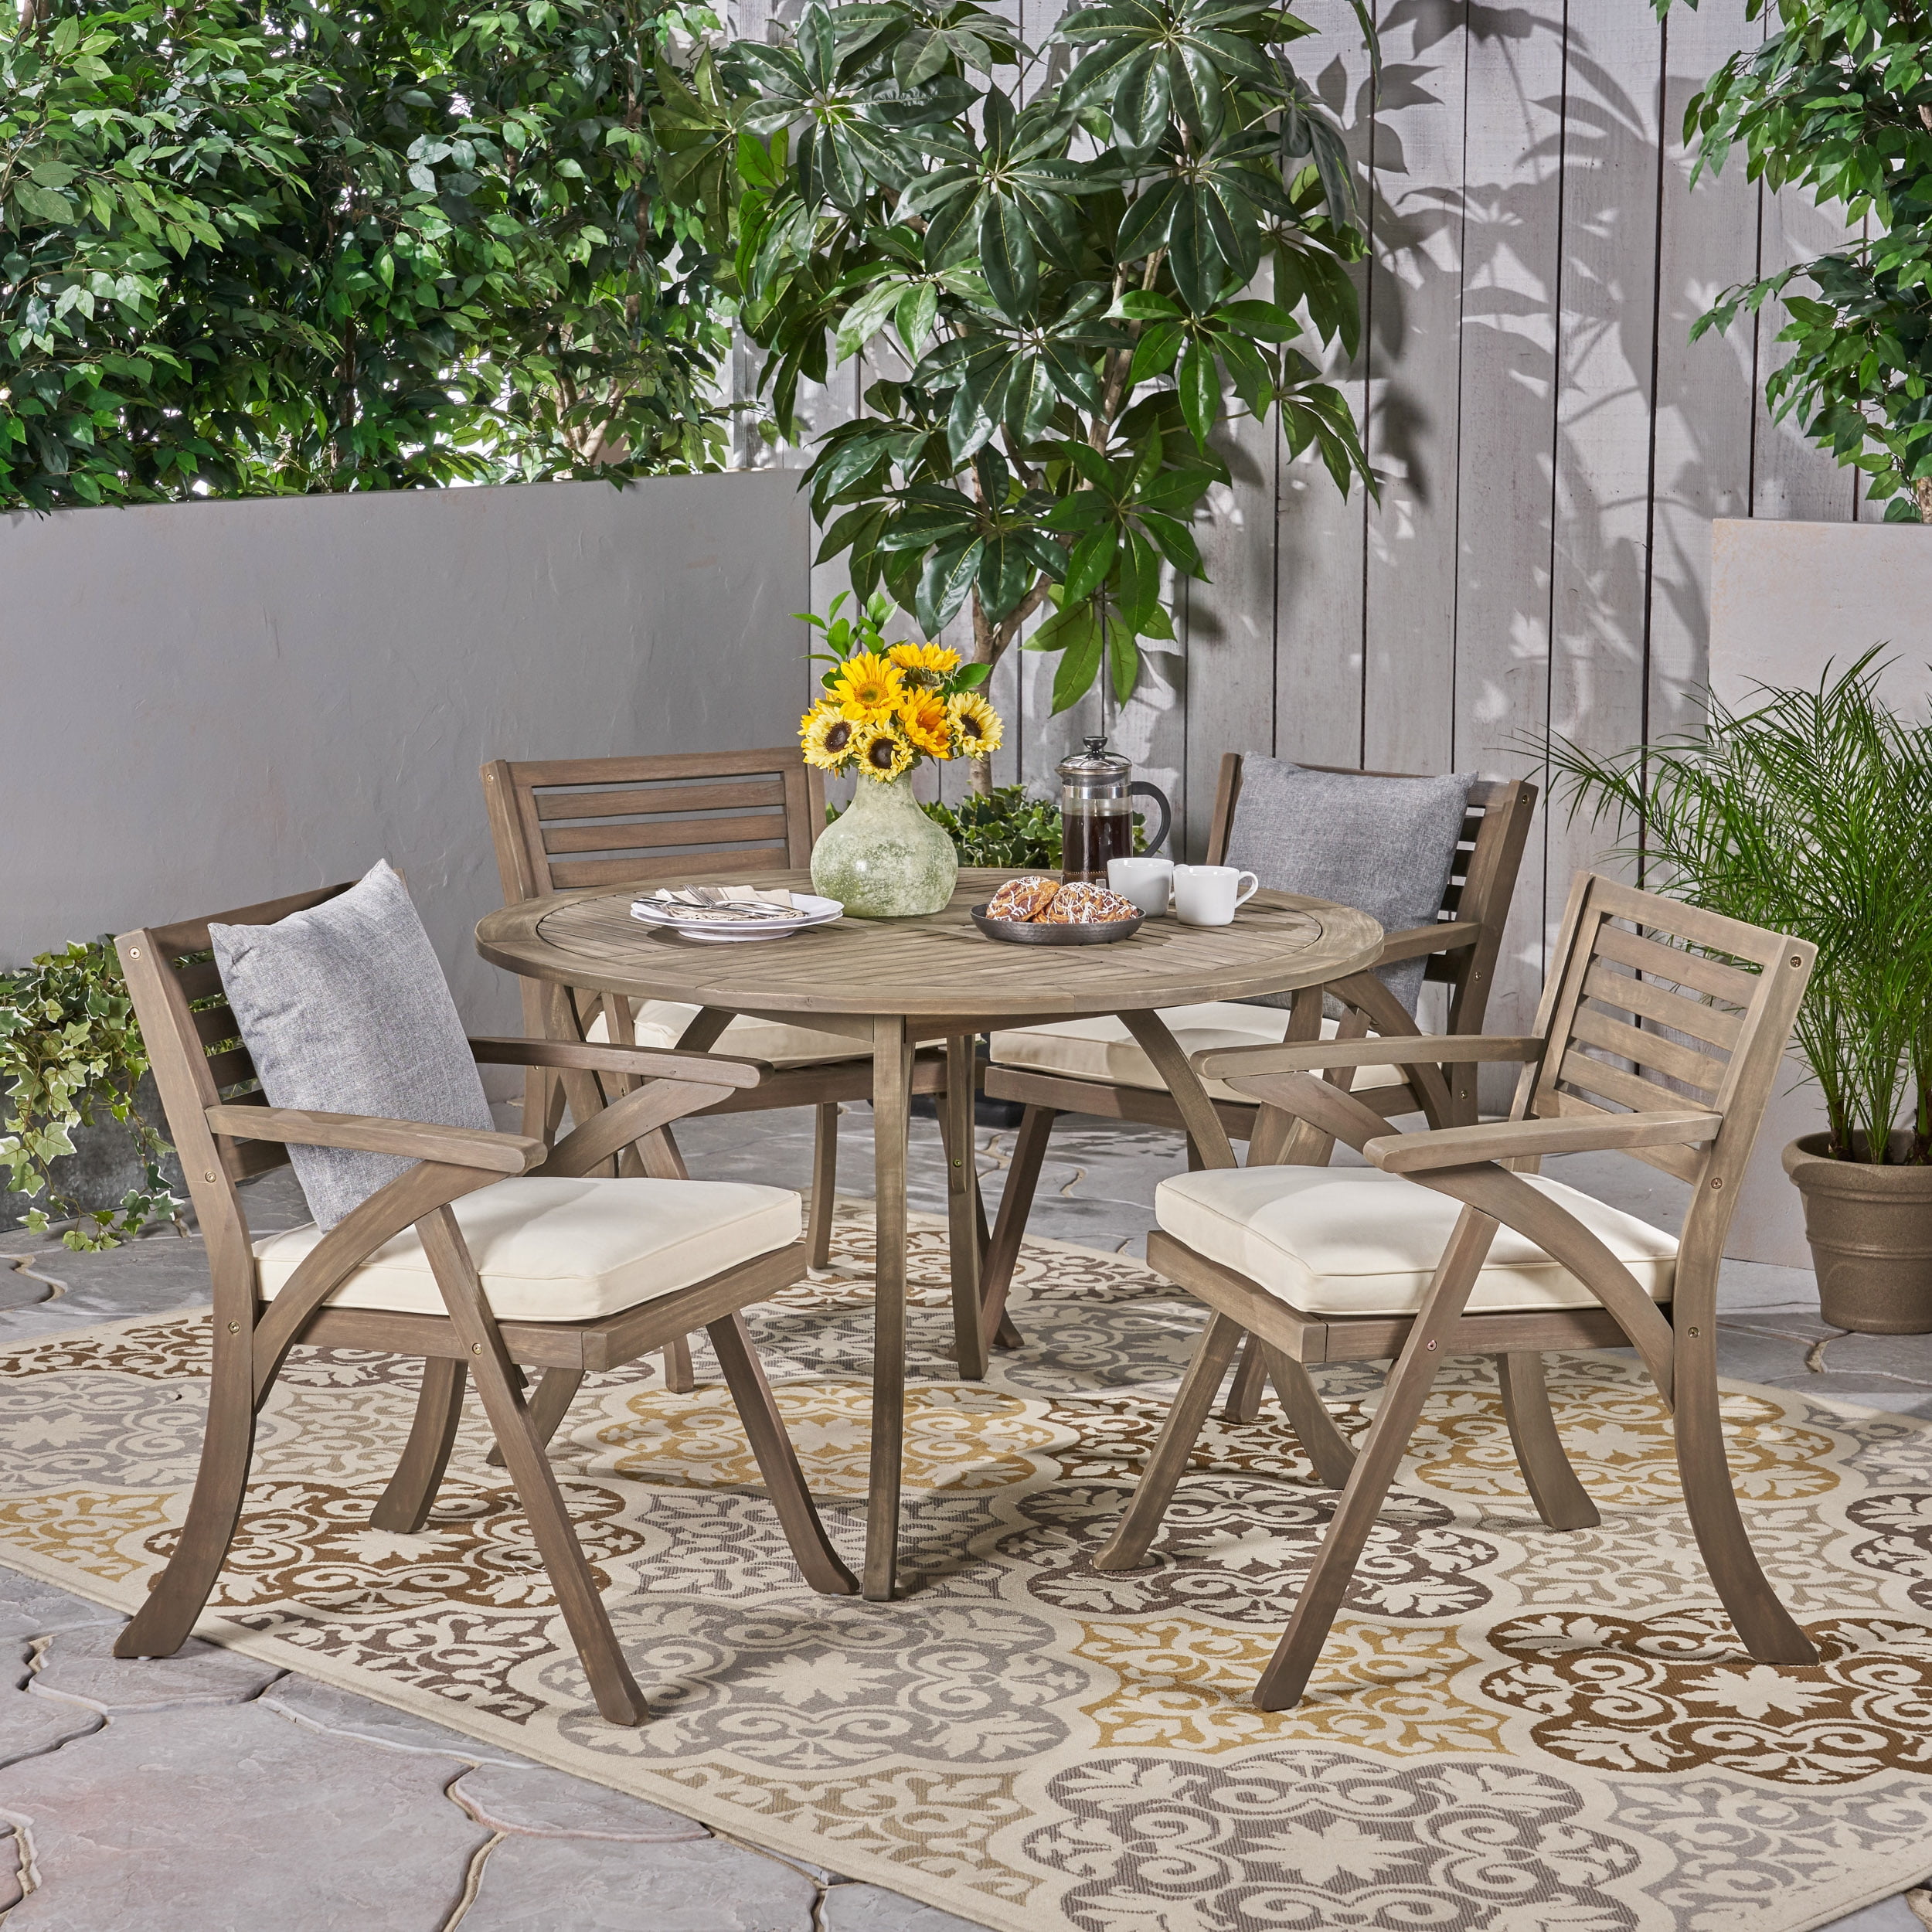 Jordy Outdoor 5 Piece Acacia Wood Dining Set With Round Table Gray